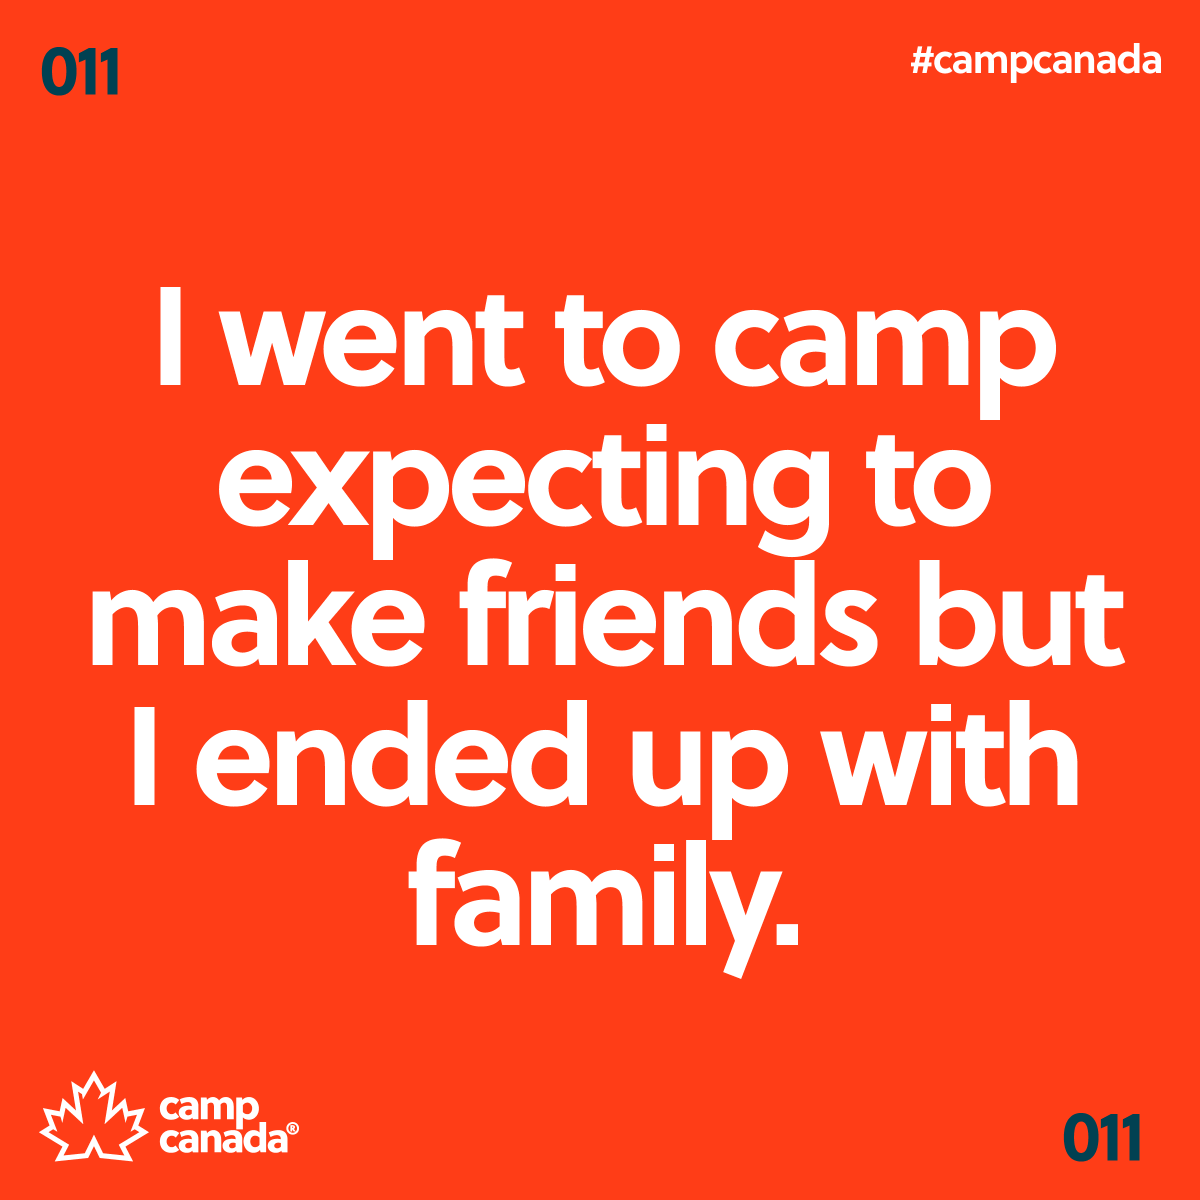 Summer Camp Fact #11
Tag your camp family ♥️👇
___
#CampCanada #Canada #ExploreCanada #SummerCamp #summercampfun #CanadaHereICome #StudentLife #CampVibes #OptOutside #CampViews #CanadianAdventure #BecauseCanada #nyquest #campiscalling